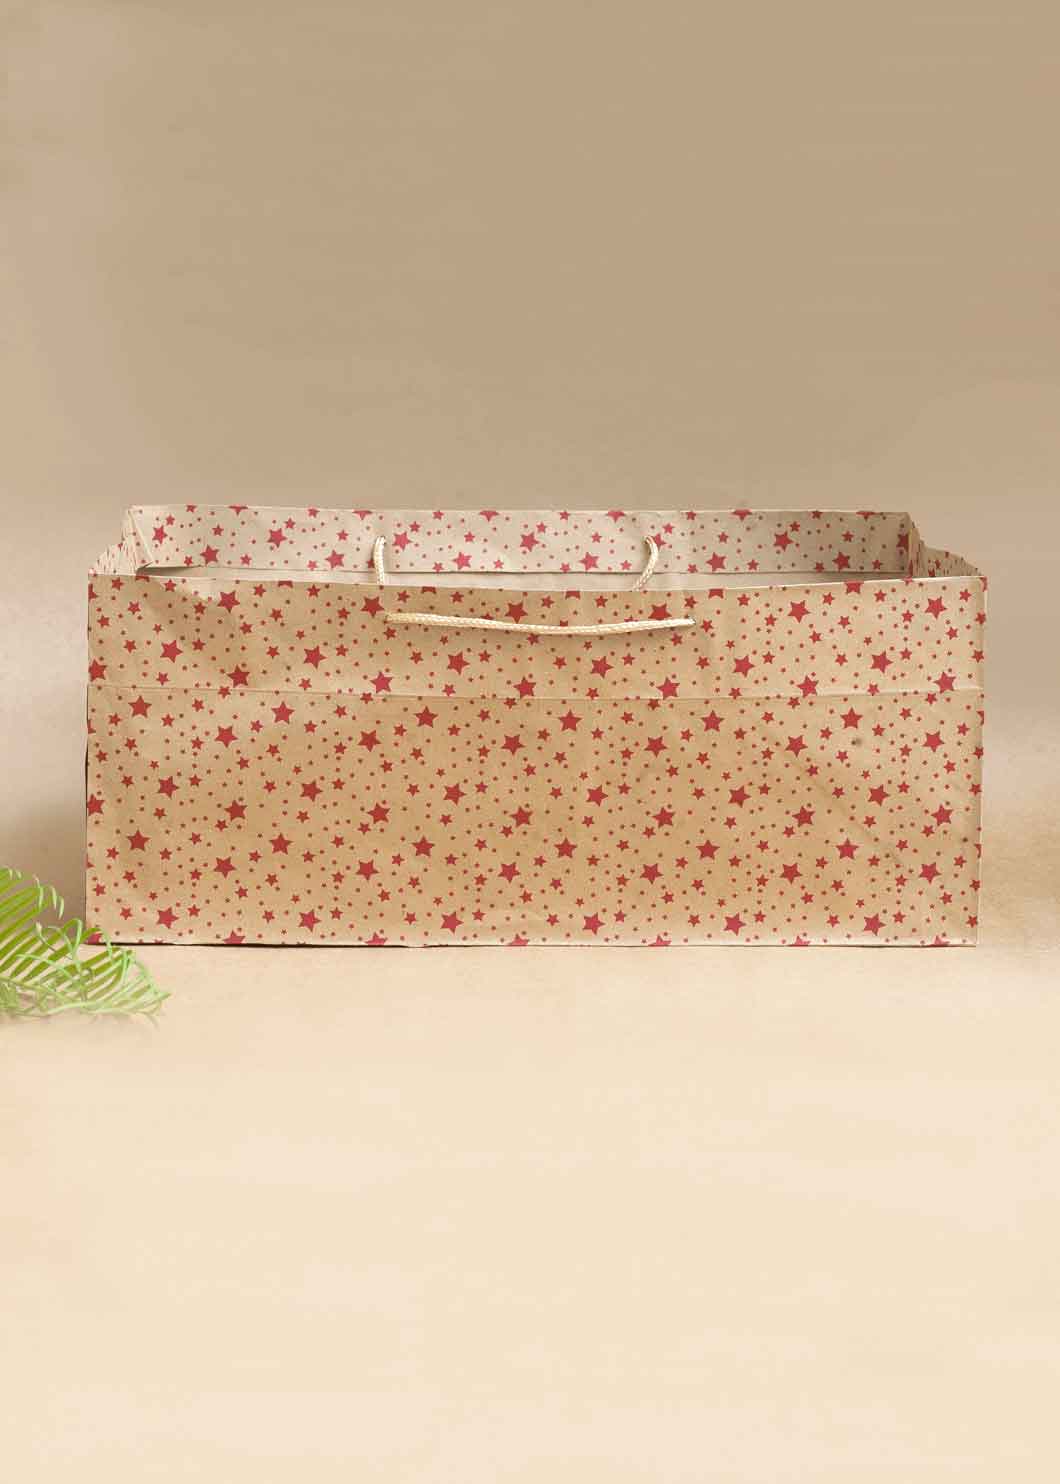 Craft Star Pattern Paper Design Bag for Packing Paper Bags